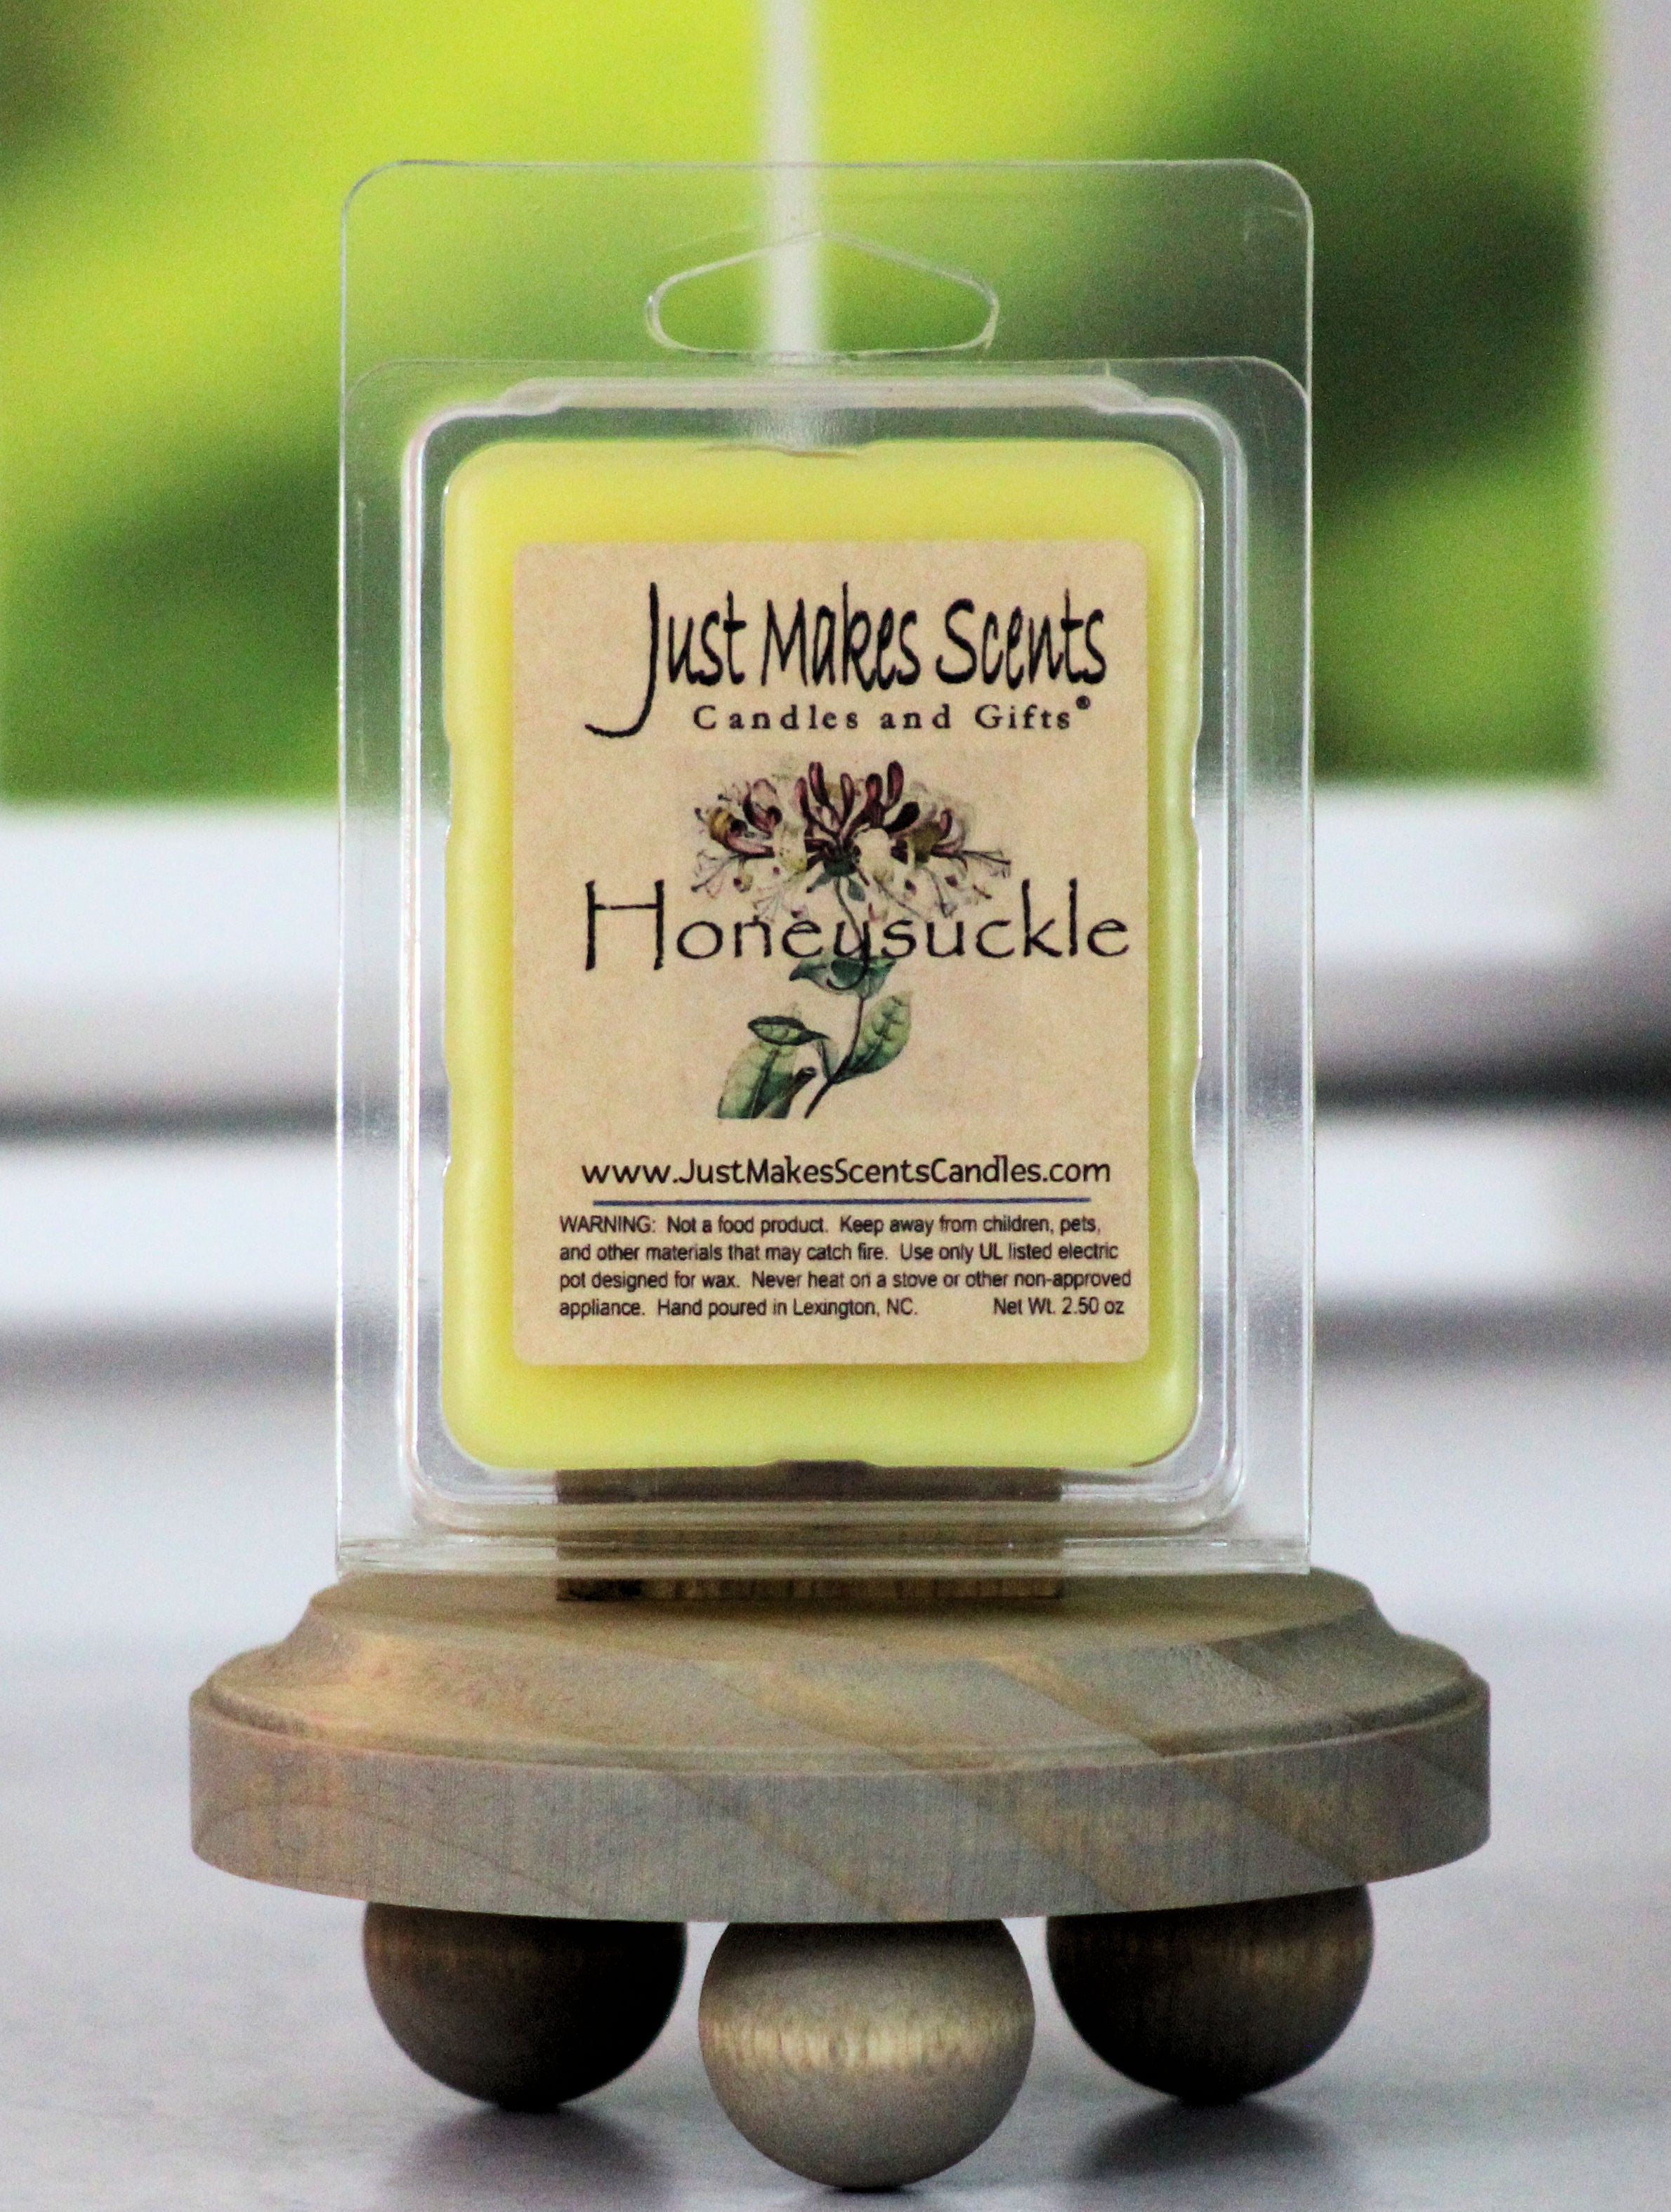 Honeysuckle and Edelflower Scented Wax Melts . Wax Melts Tarts Assorted .  Eco Soy Wax Warmer Melts. Gift for her